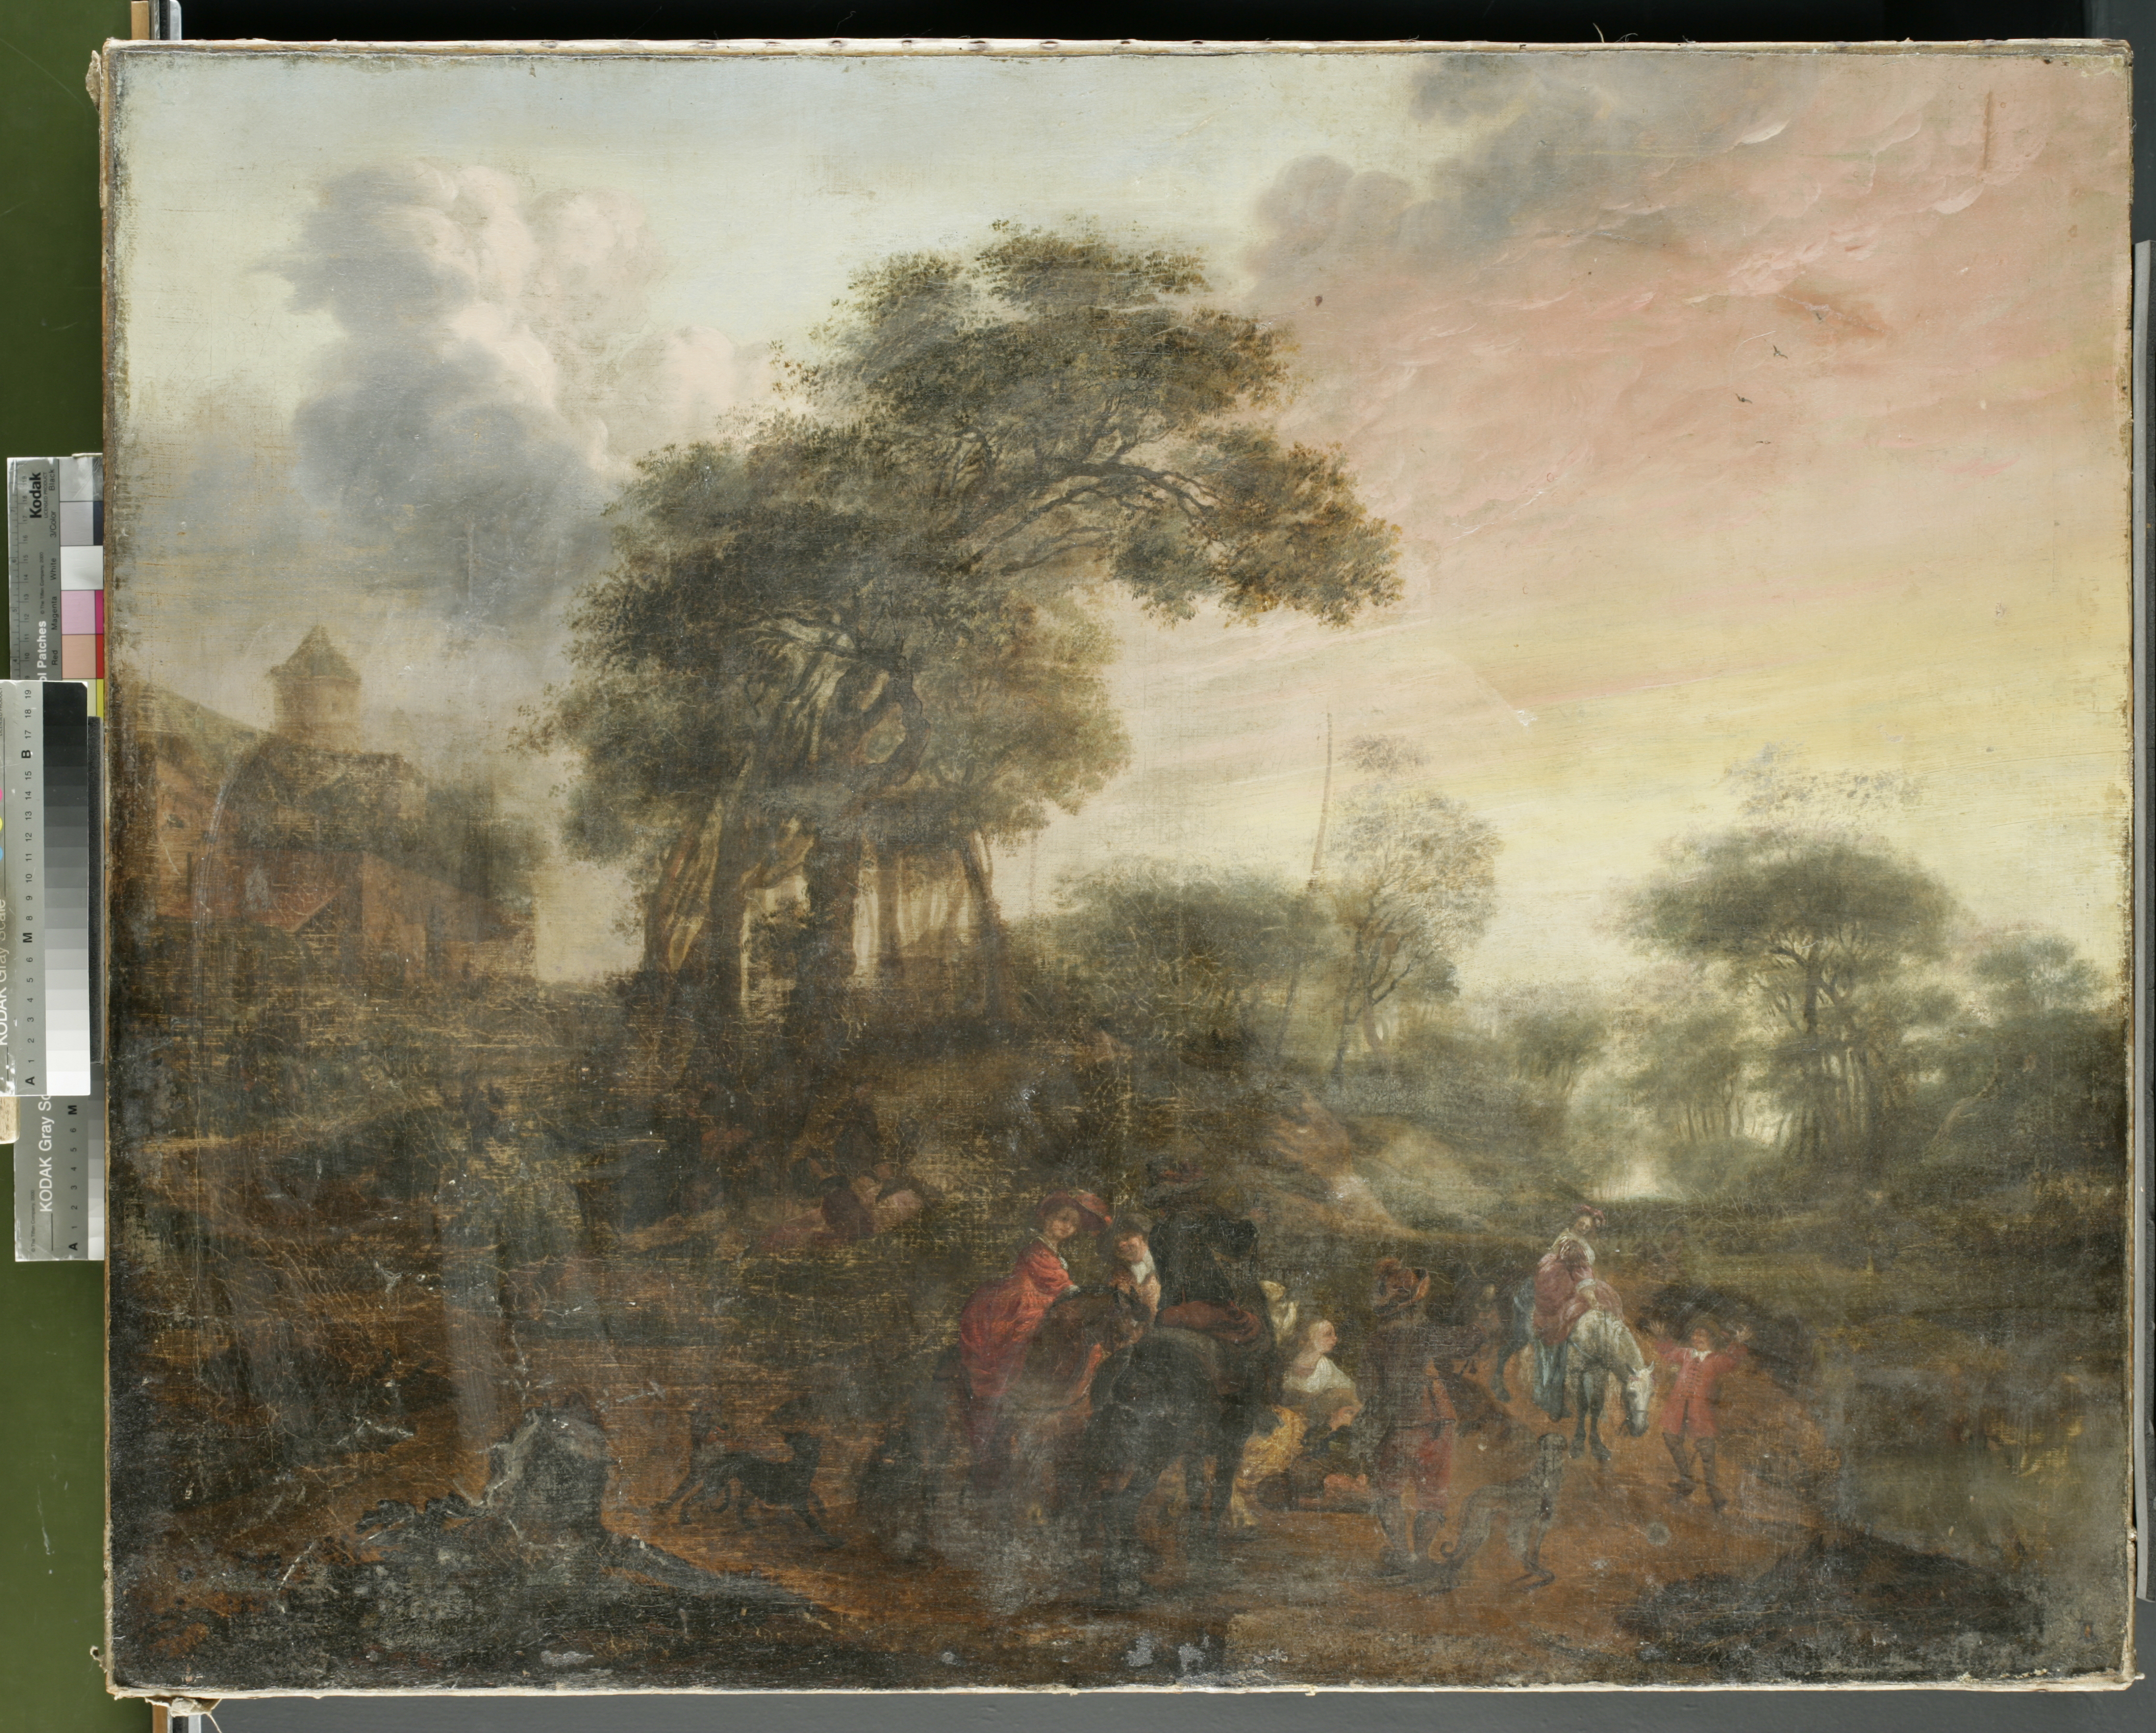 Figure 1: Landscape with Figures, whole front, before treatment (©Titmus)